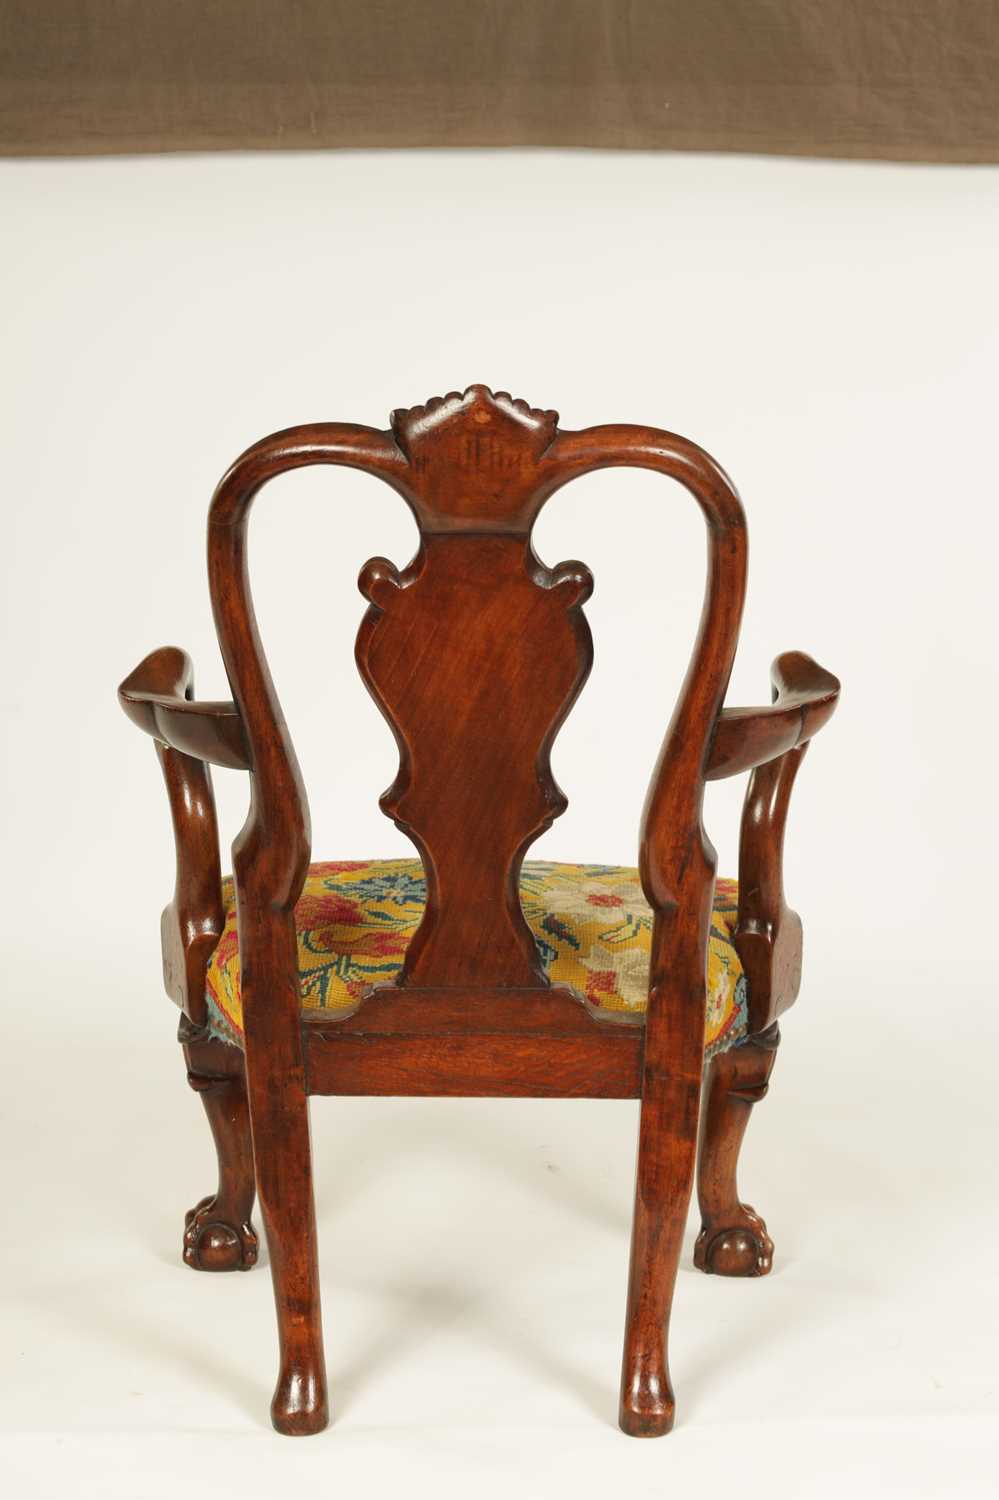 A 19TH CENTURY GEORGE I STYLE BURR WALNUT CHILD'S CHAIR - Image 9 of 9